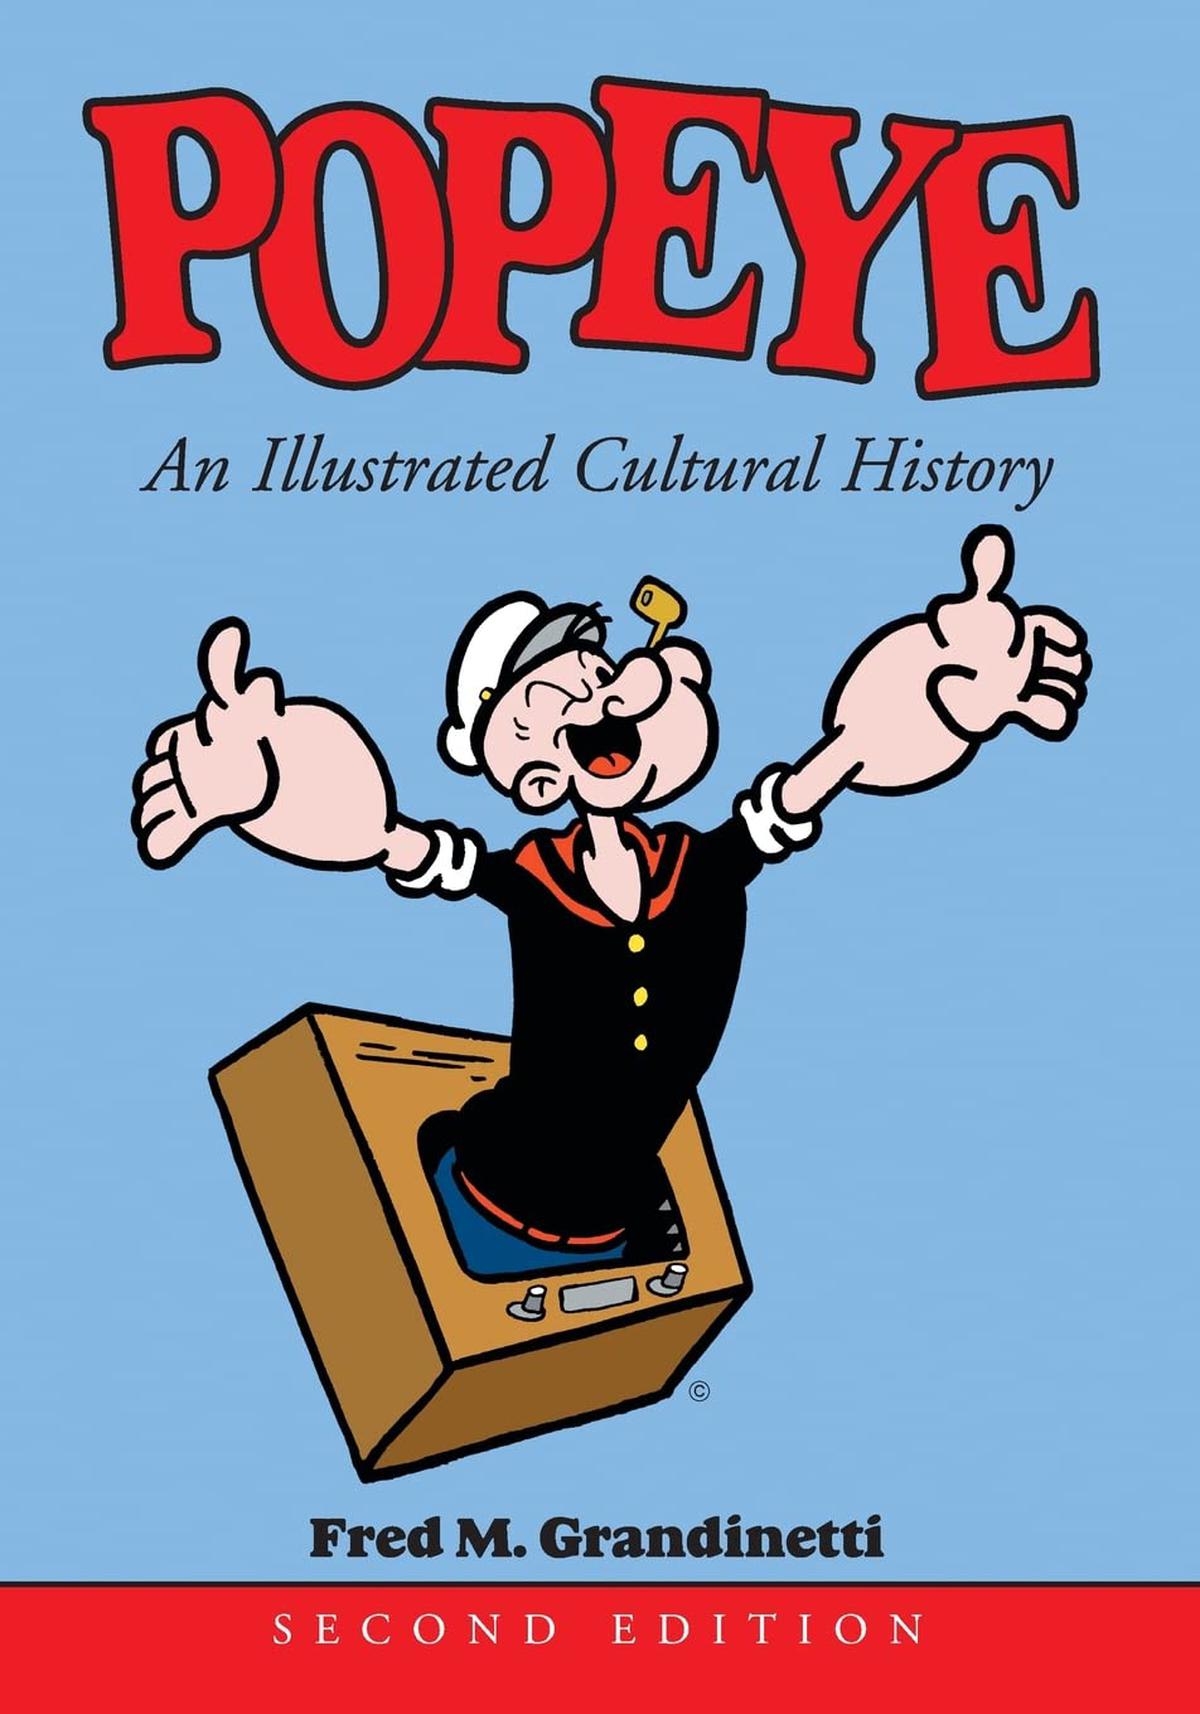 'Popeye: An Illustrated Cultural History' by Fred M. Grandinetti